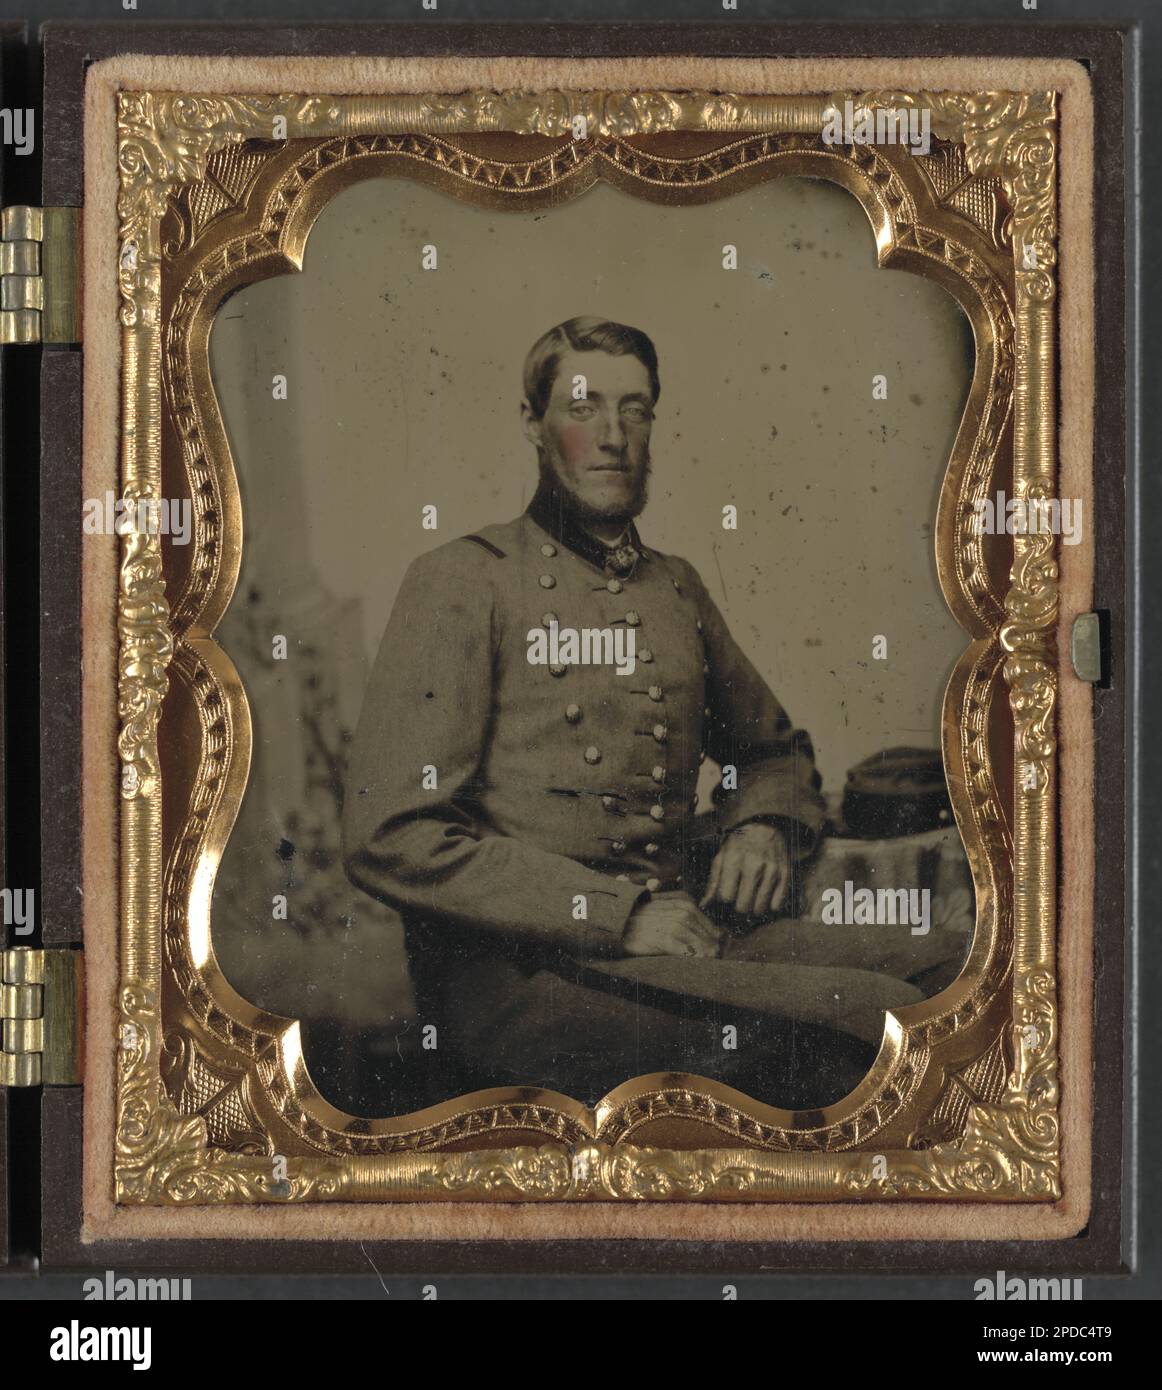 Unidentified soldier in Confederate uniform with rifleman buttons. Liljenquist Family Collection of Civil War Photographs , Published in: Albaugh, William A. More Confederate faces. Washington, D.C.: ABS Printers, 1972, p. 18, Published in: Serrano, Domenick A. Still more Confederate faces. Bayside, N.Y.: Metropolitan Co, 1994, p. 204, pp/liljconfed. Confederate States of America, Army, People, 1860-1870, Soldiers, Confederate, 1860-1870, Military uniforms, Confederate, 1860-1870, United States, History, Civil War, 1861-1865, Military personnel, Confederate. Stock Photo